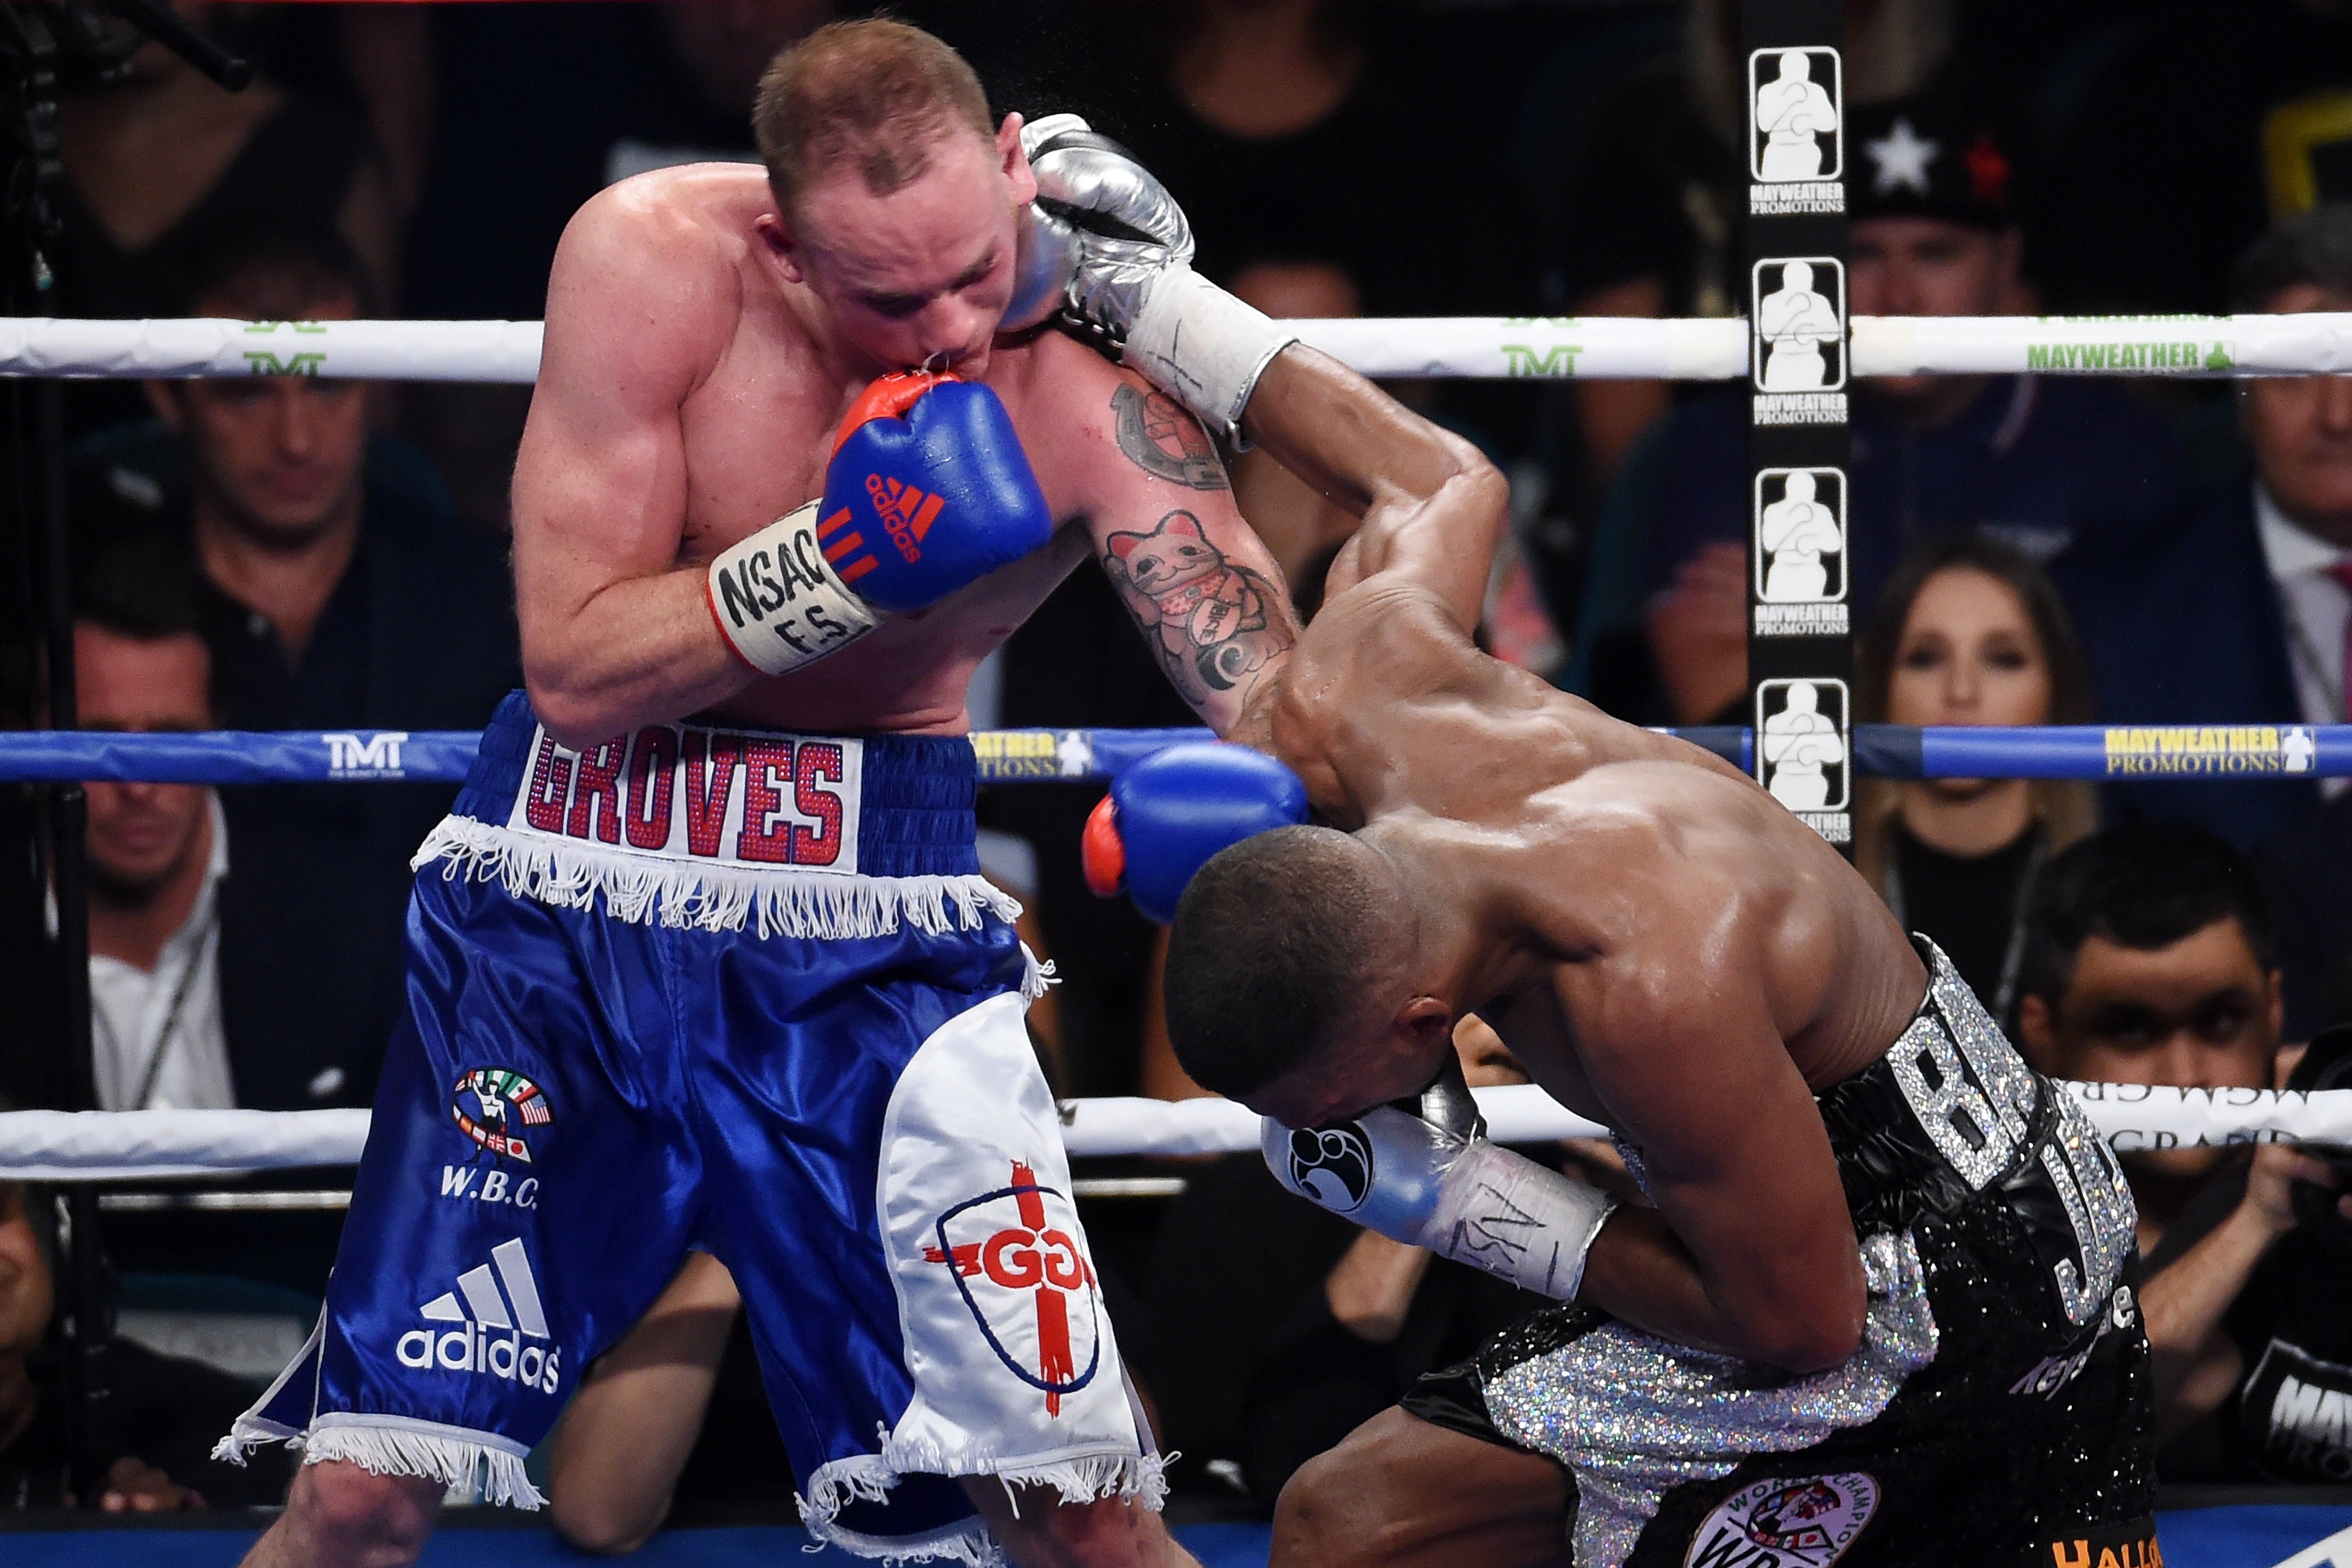 George Groves in action against Badou Jack at the MGM Grand